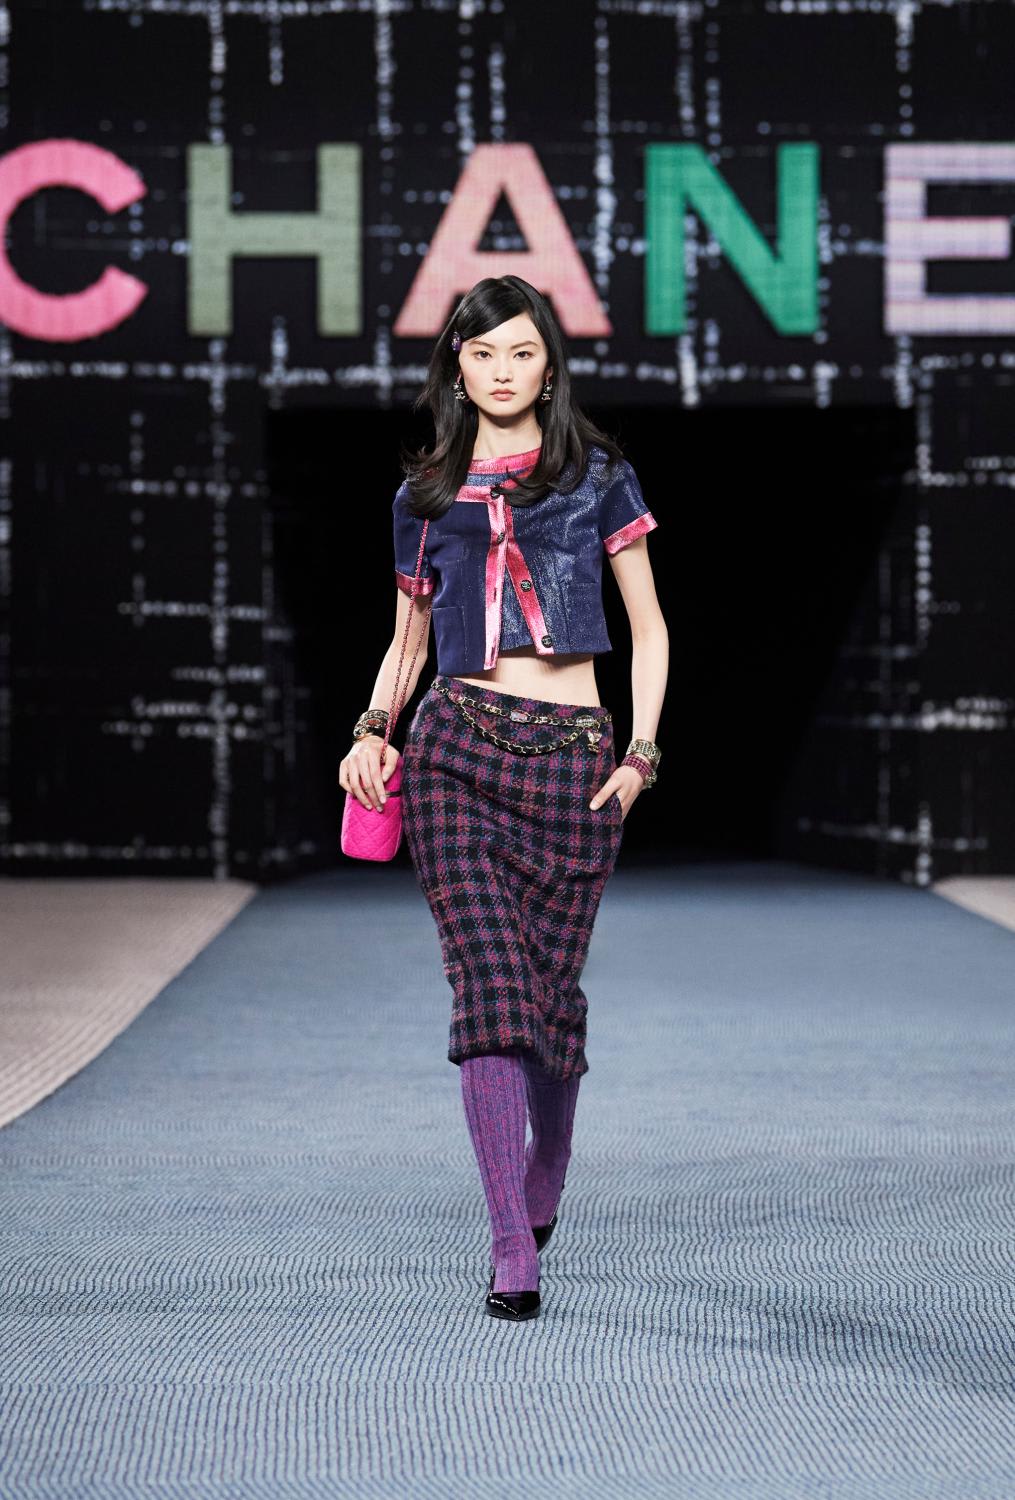 Paris Fashion Week: Chanel's collection plays with earthy, relaxed